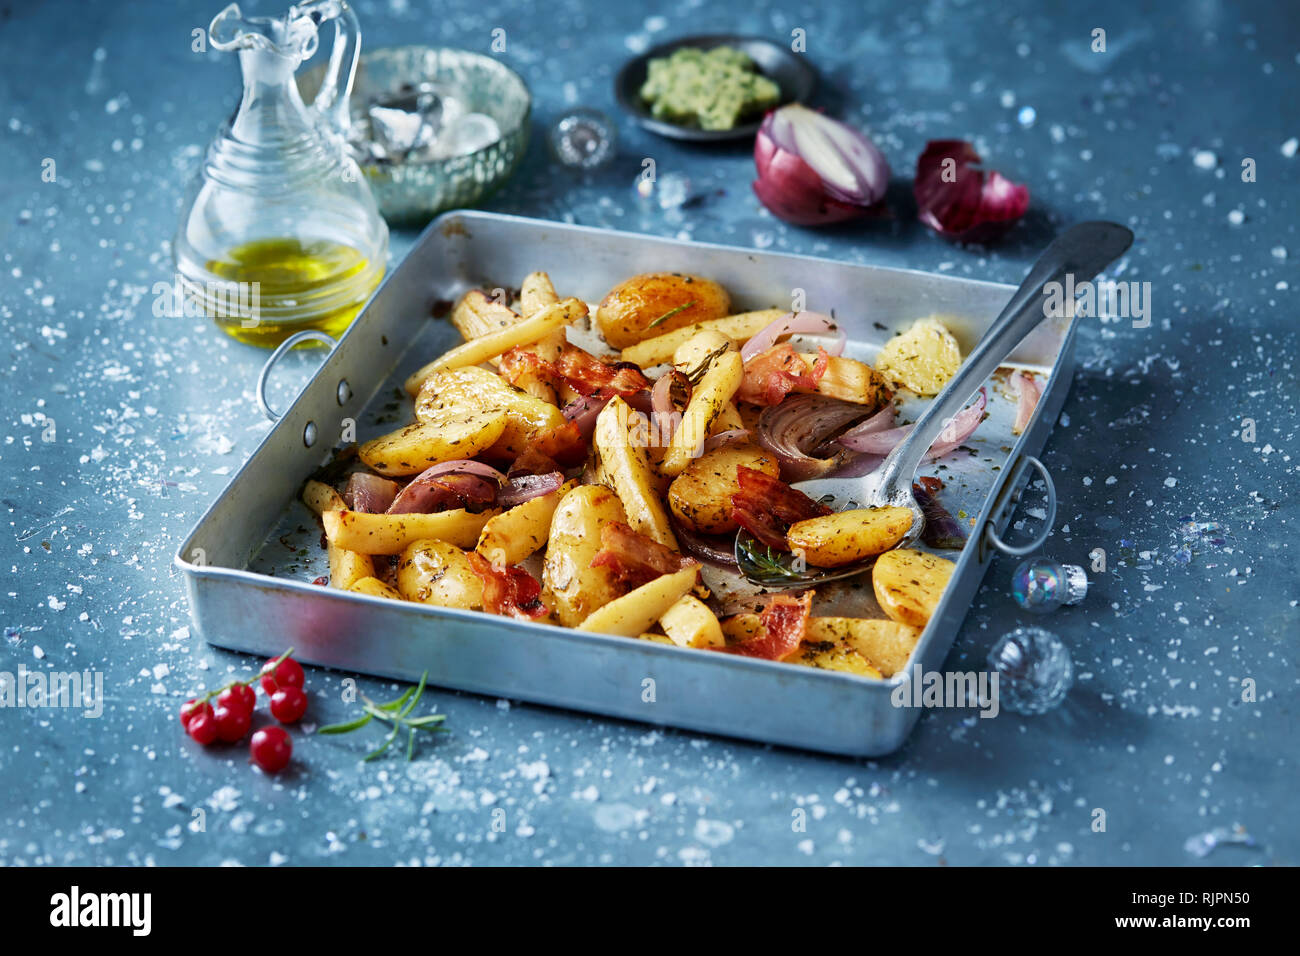 Roasted vegetables with red onions in roasting tin, seasonal christmas food Stock Photo